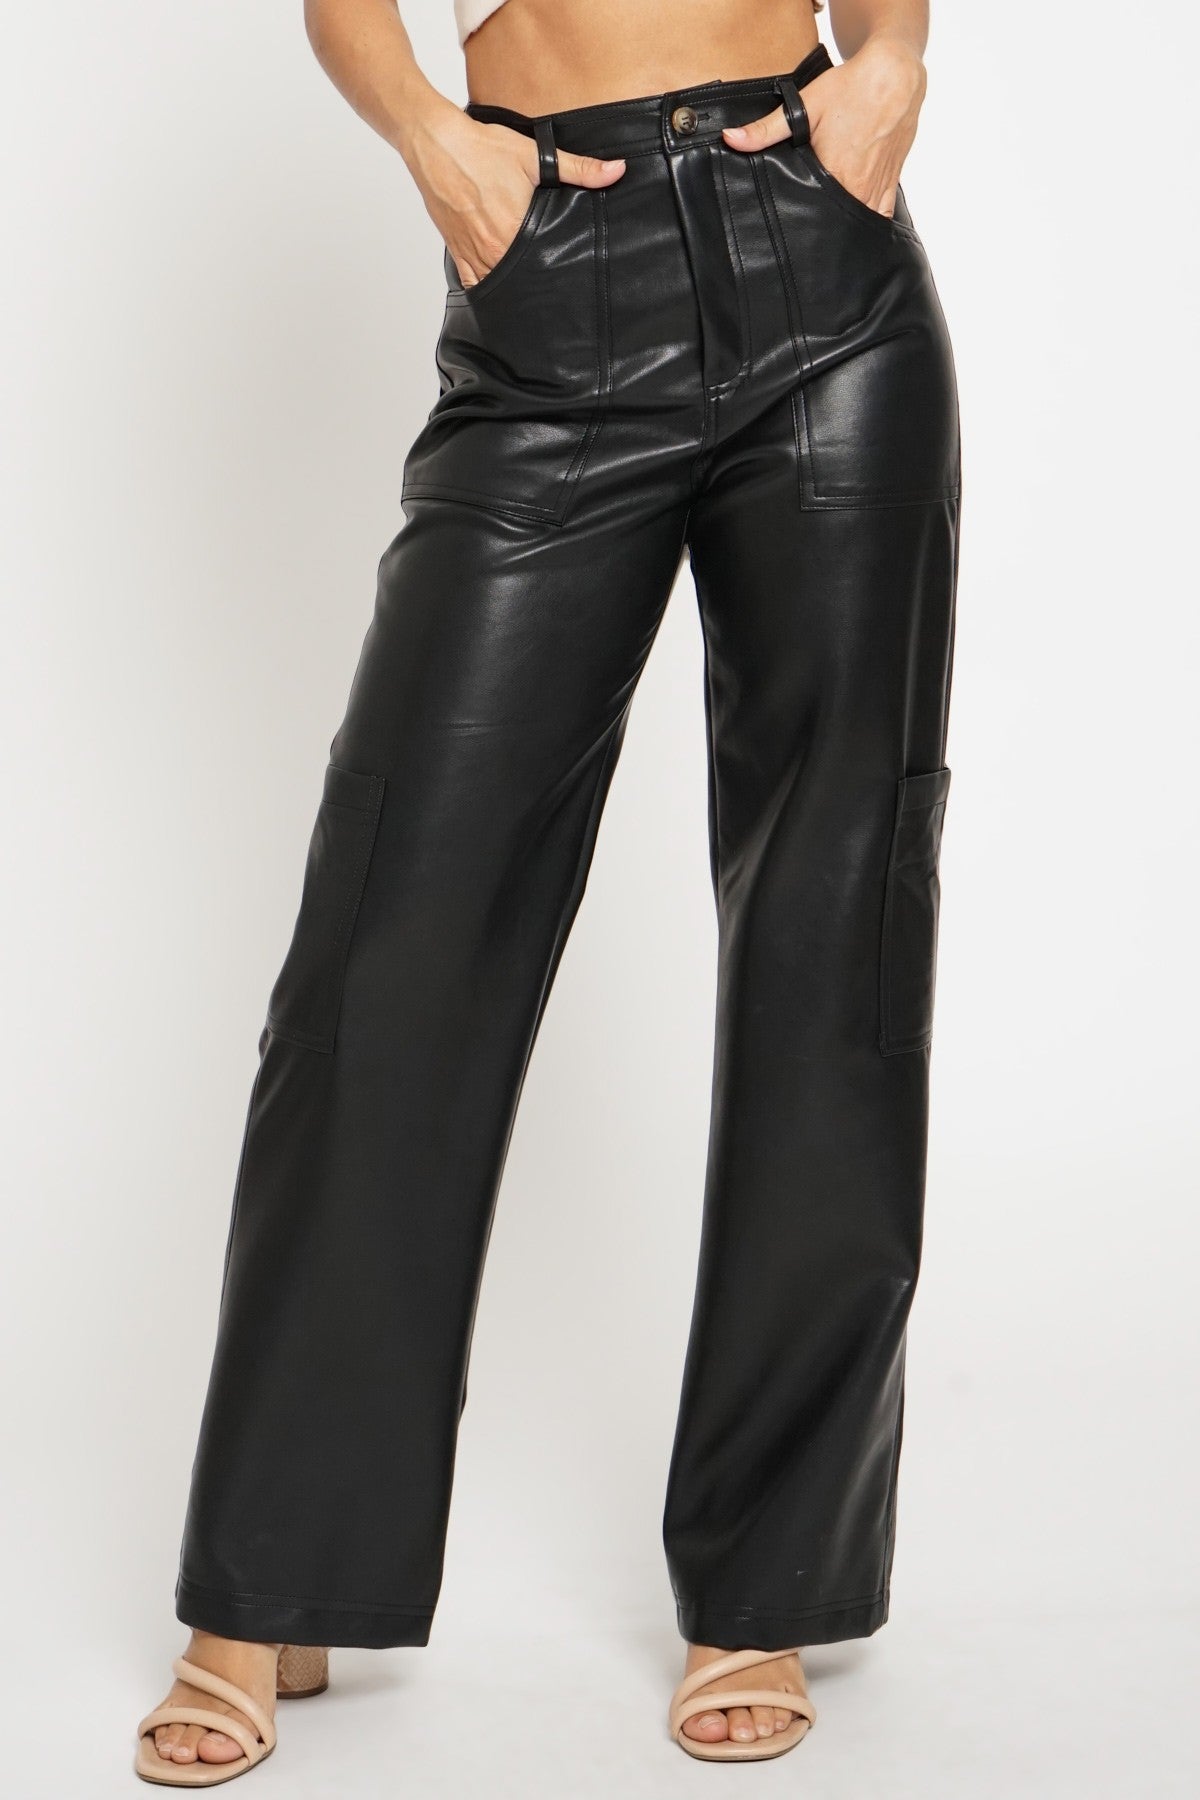 HIGH & TIGHT LEATHER PANT – THE CAST